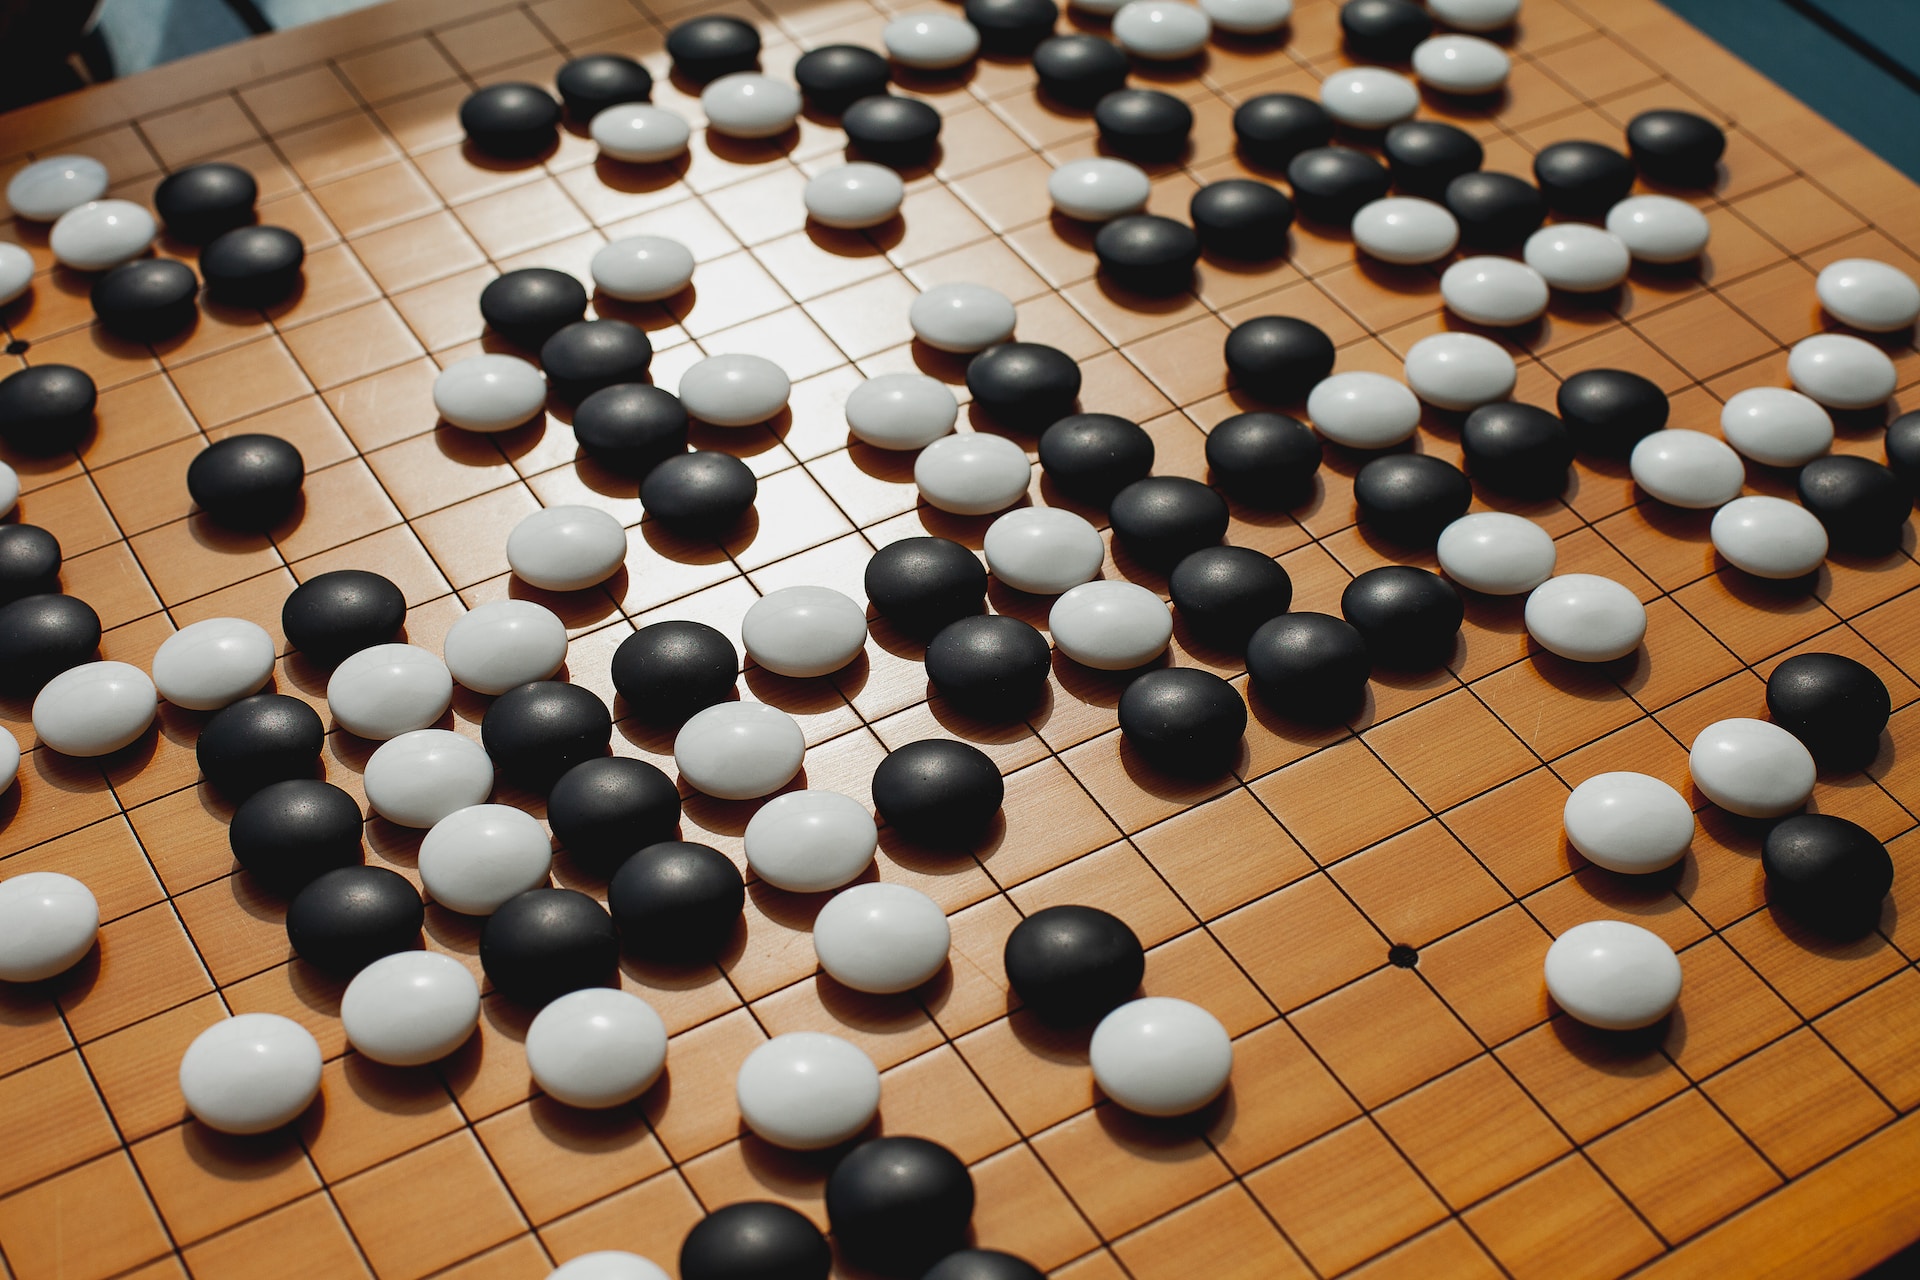 A close of a board game with black and white balls